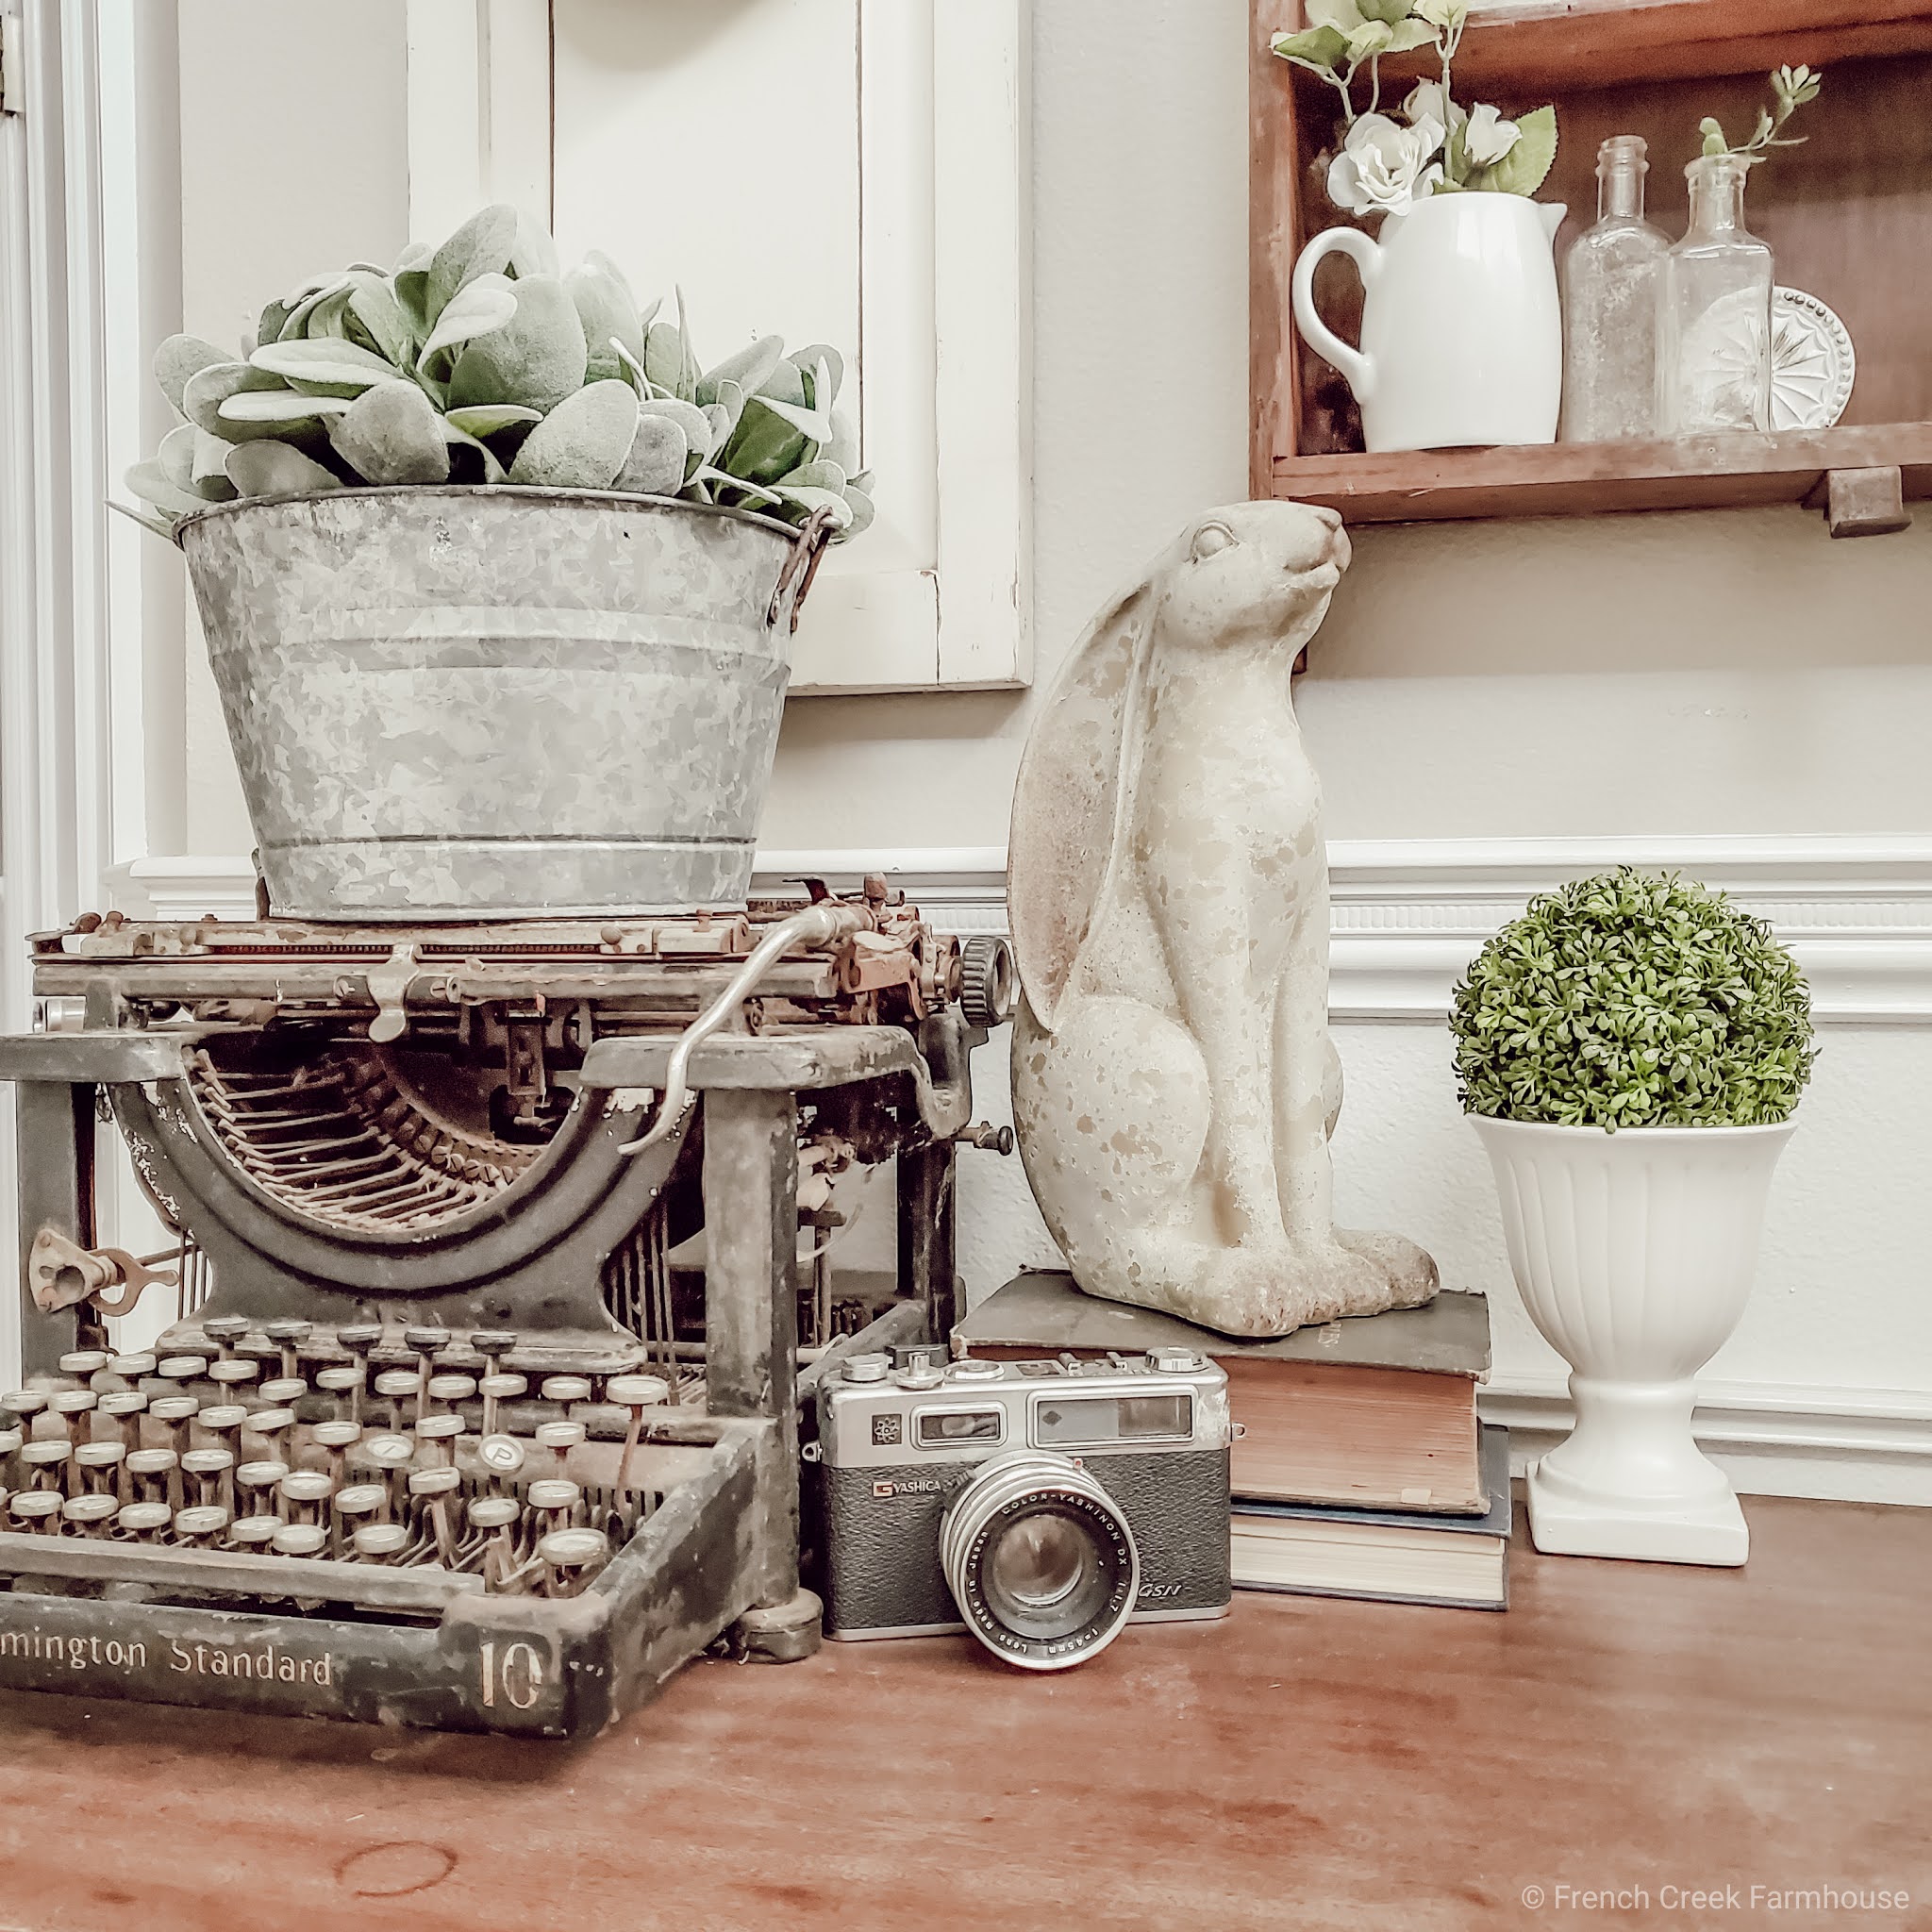 An antique typewriter is a beautiful piece of vintage decor on a console table